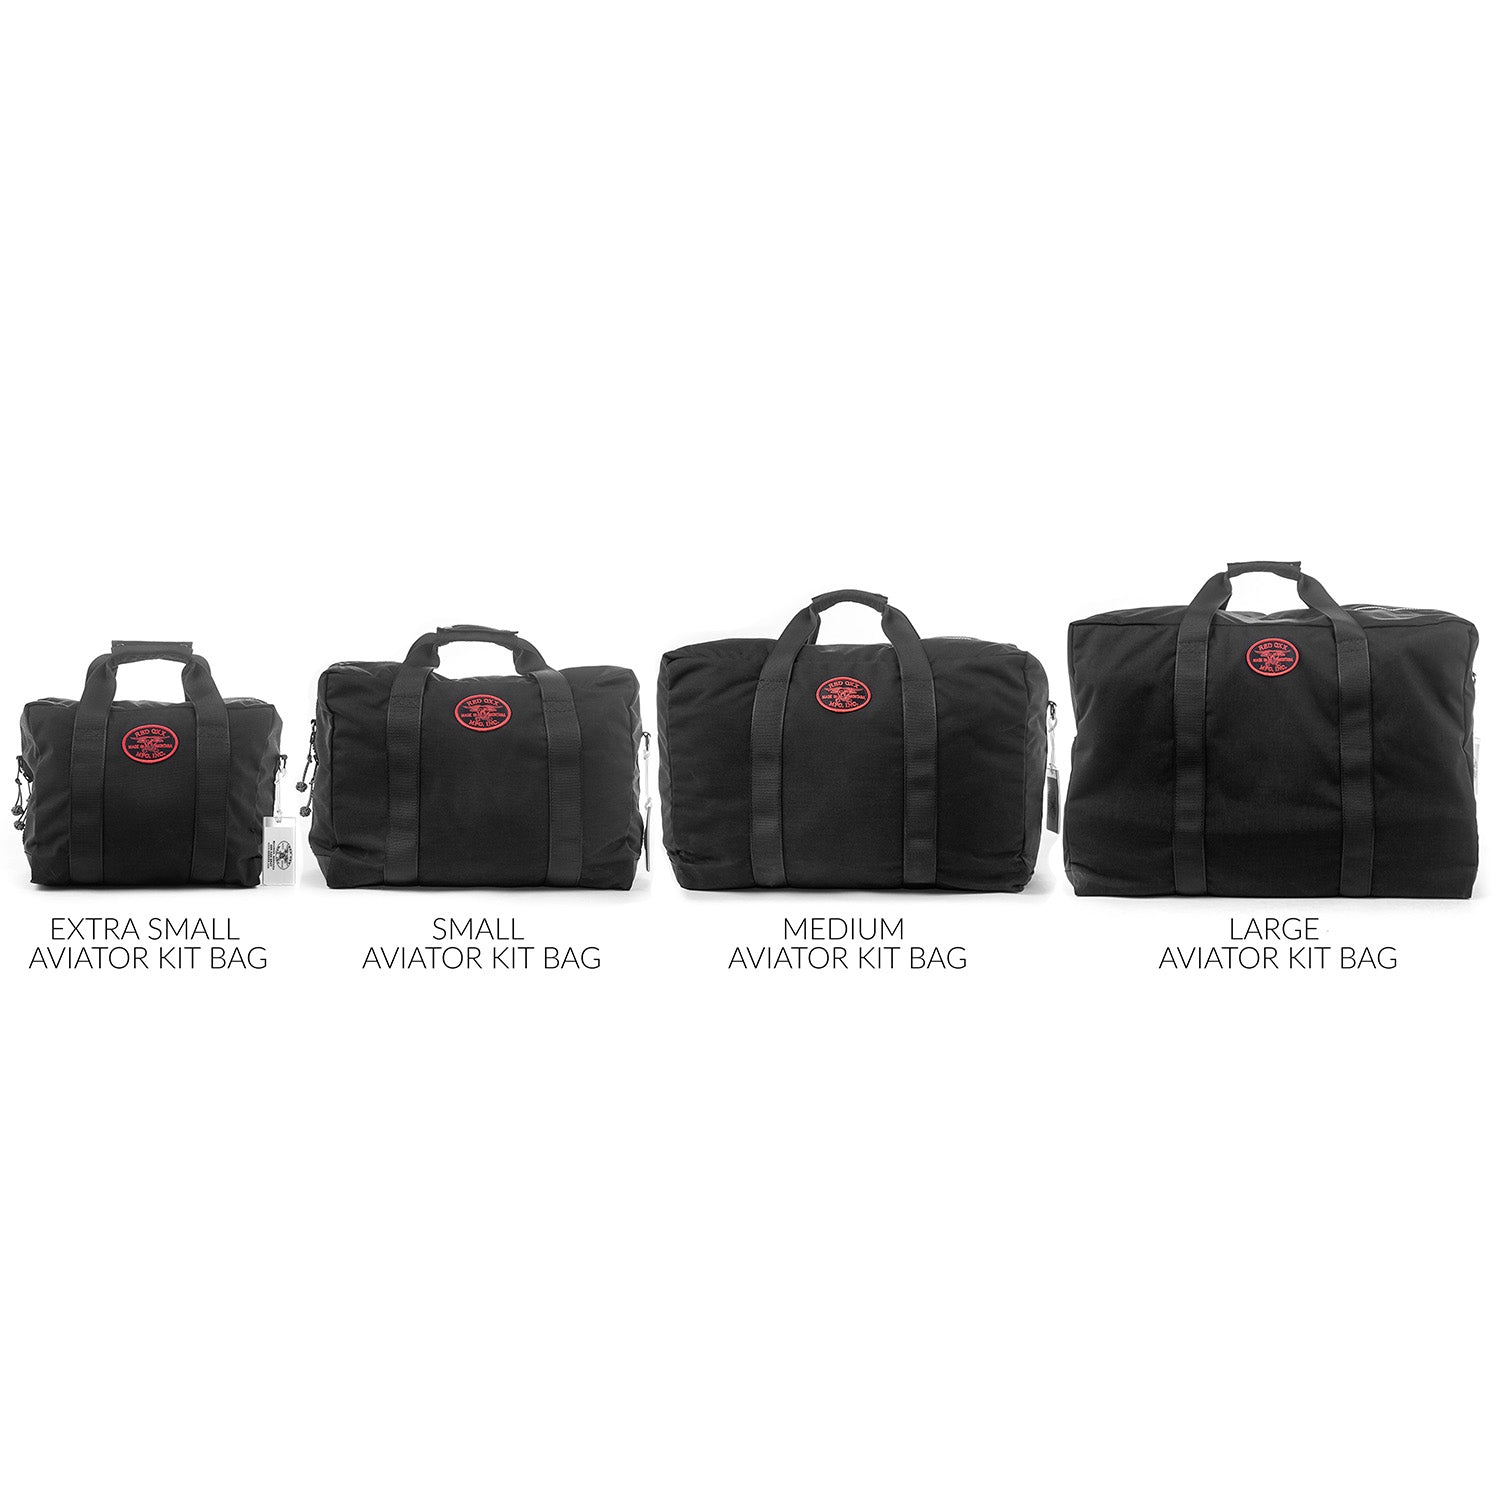 From left to right, Extra Small Aviator Kit Bag,Small aviator Kit Bag, Medium Aviator Kit Bag, Large Aviator Kit Bag.  Side View